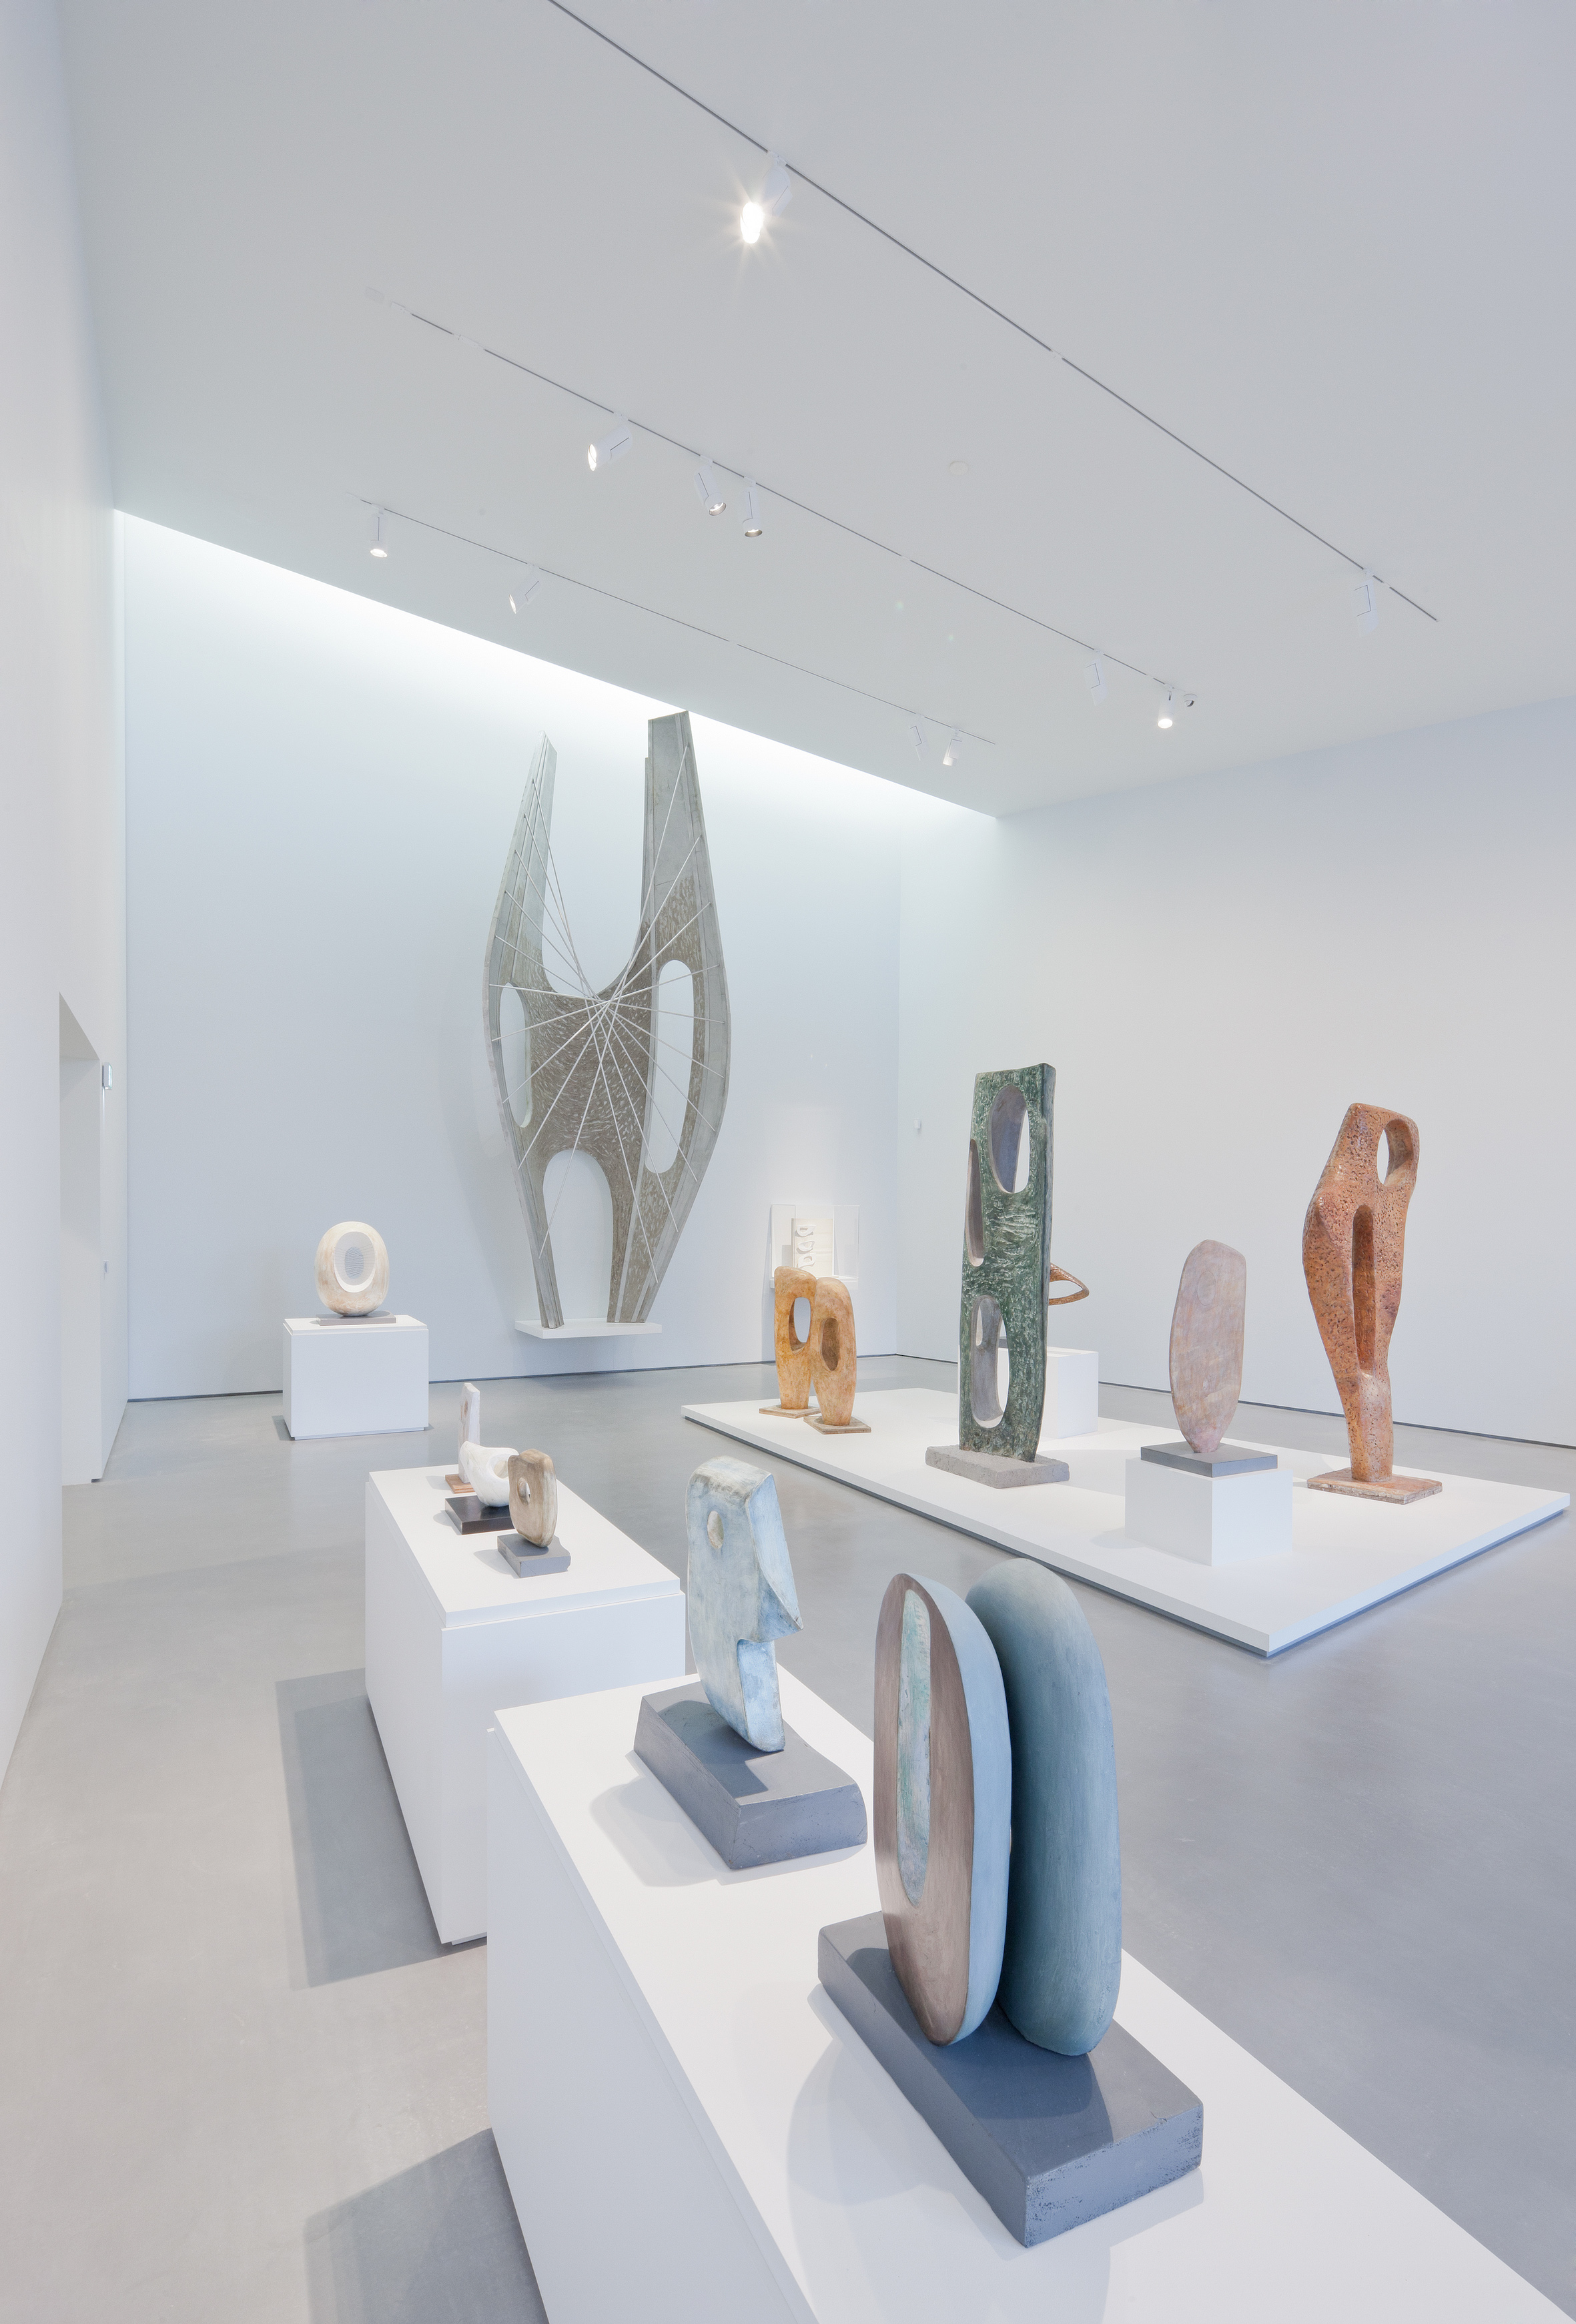 A gallery at The Hepworth, with white walls and grey floor. Hepworth's works are presented throughout the space on plinths.